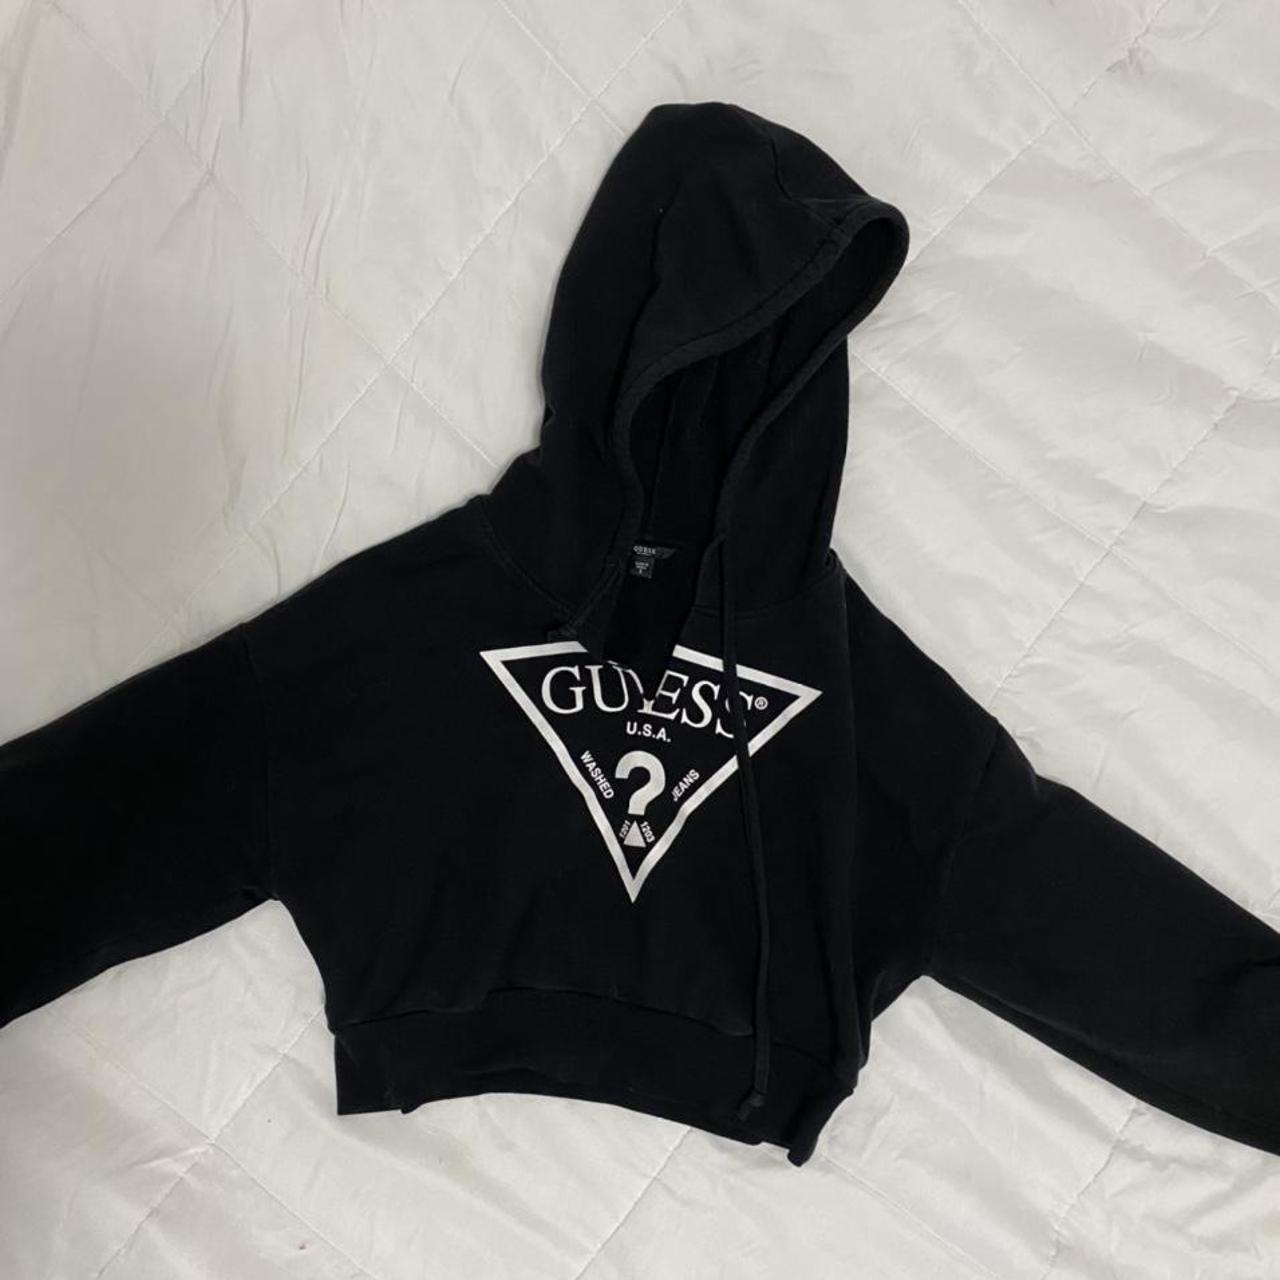 Guess Women's Black and White Hoodie